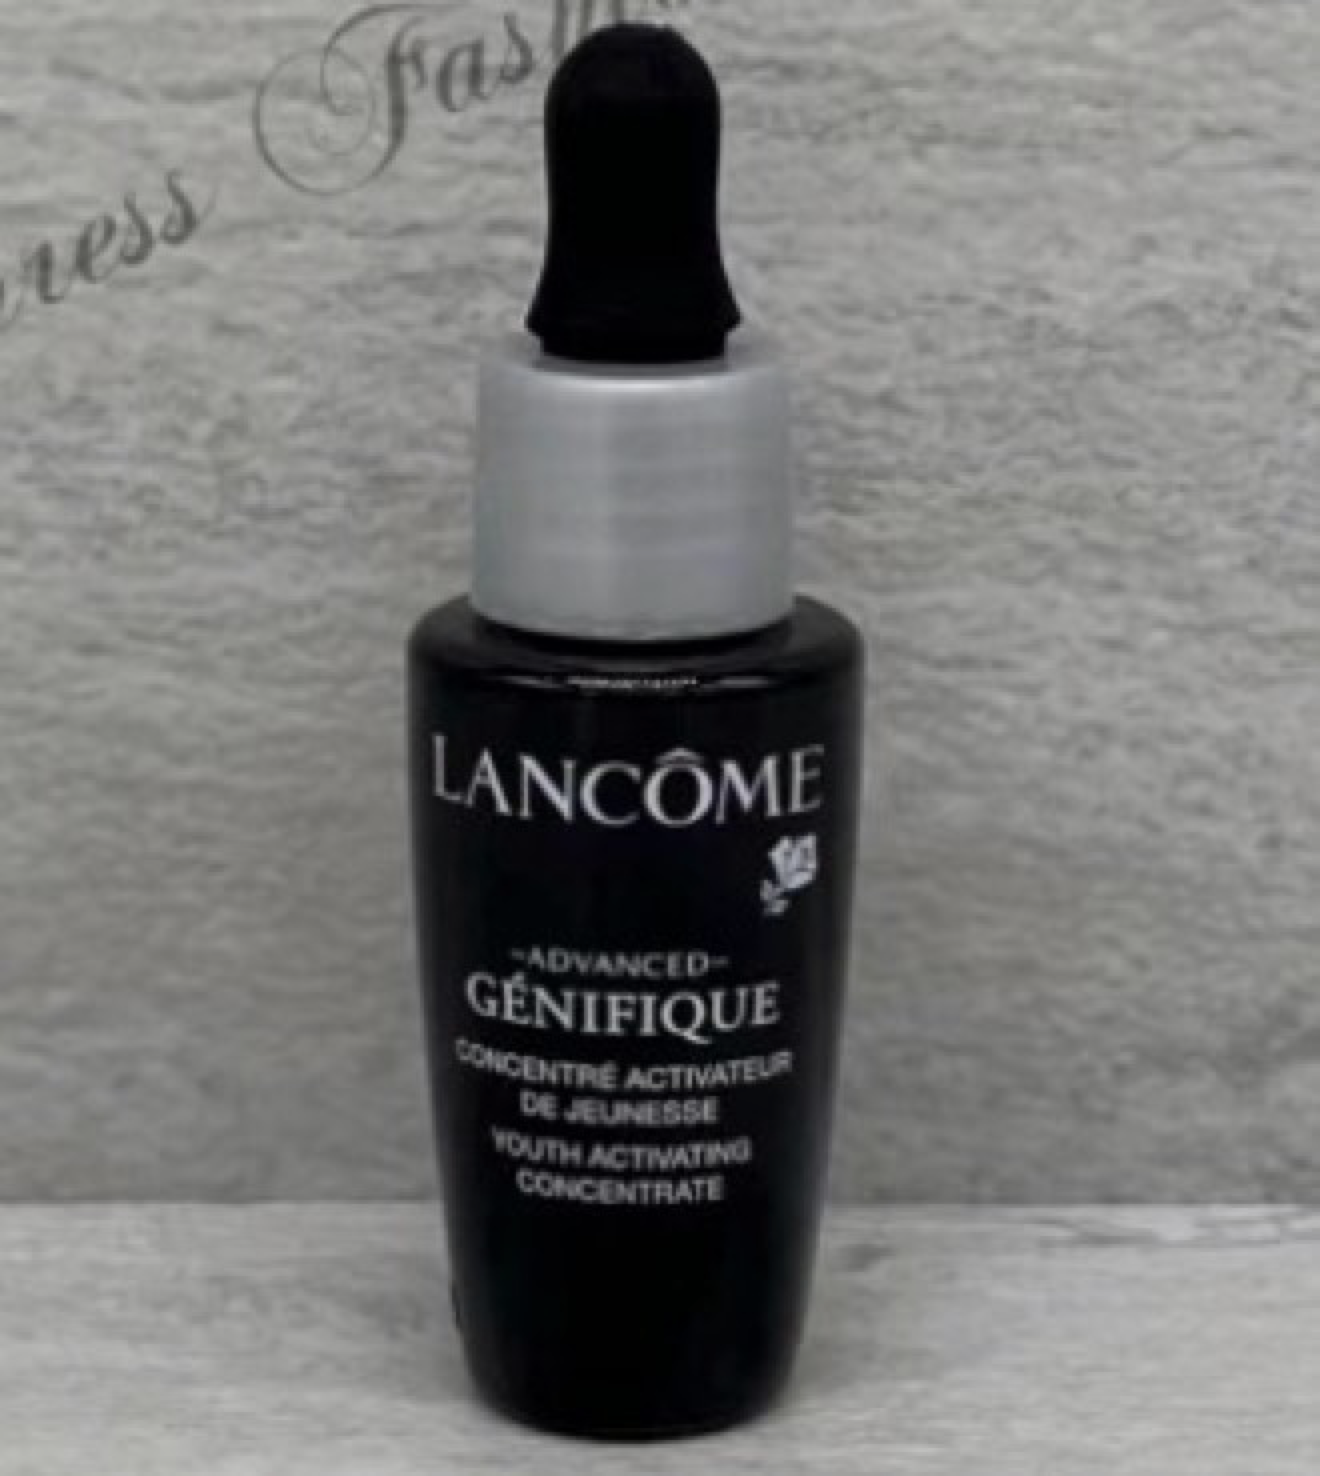 New Lancome Advanced Genifique Youth Activating face Concentrate serum - $7.99